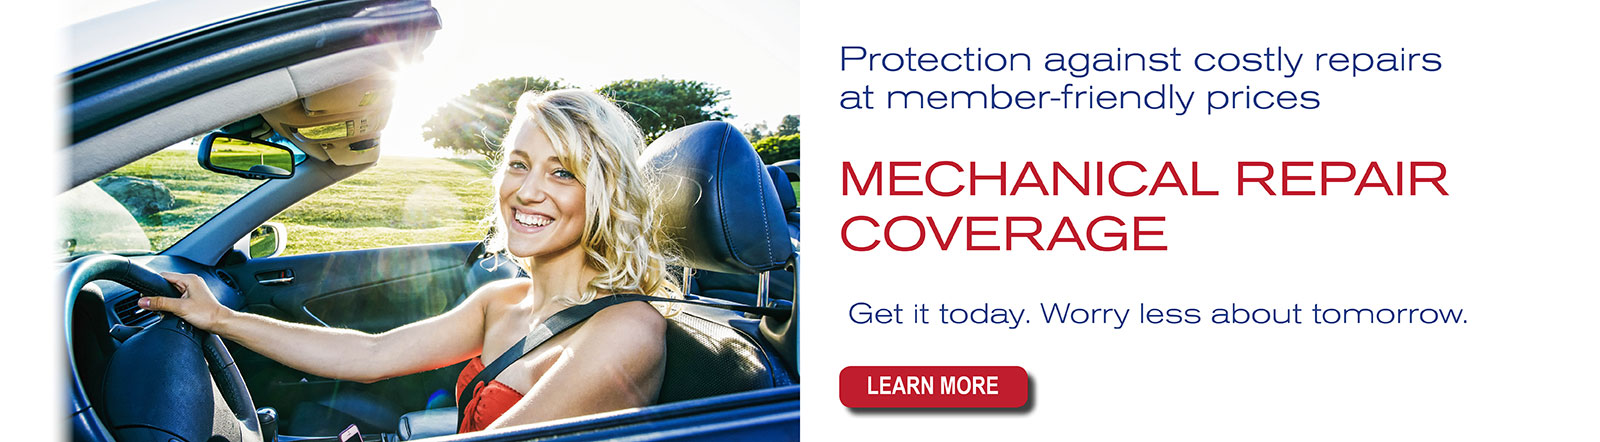 Mechanical Repair Coverage. Protection against costly repairs at member-friendly prices. Get it today. Worry less about tomorrow.